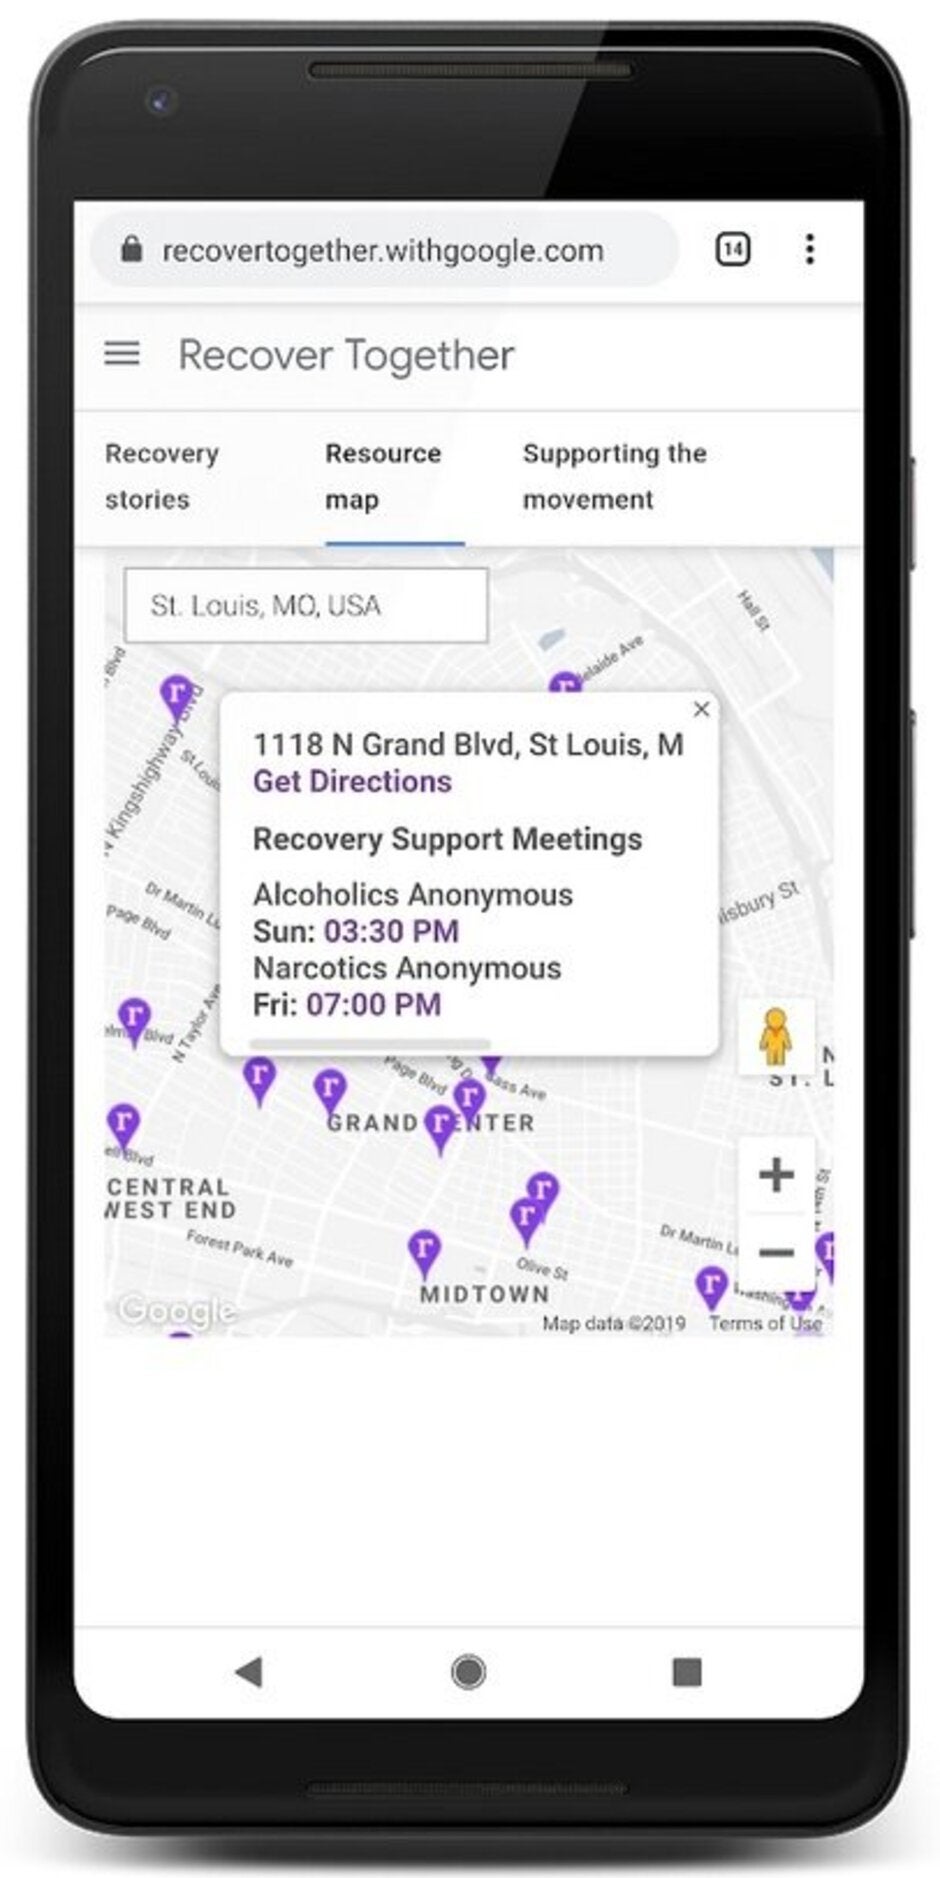 Google Maps will provide directions to meetings for those in recovery - Google Maps adds support for those recovering from alcohol or drug addiction